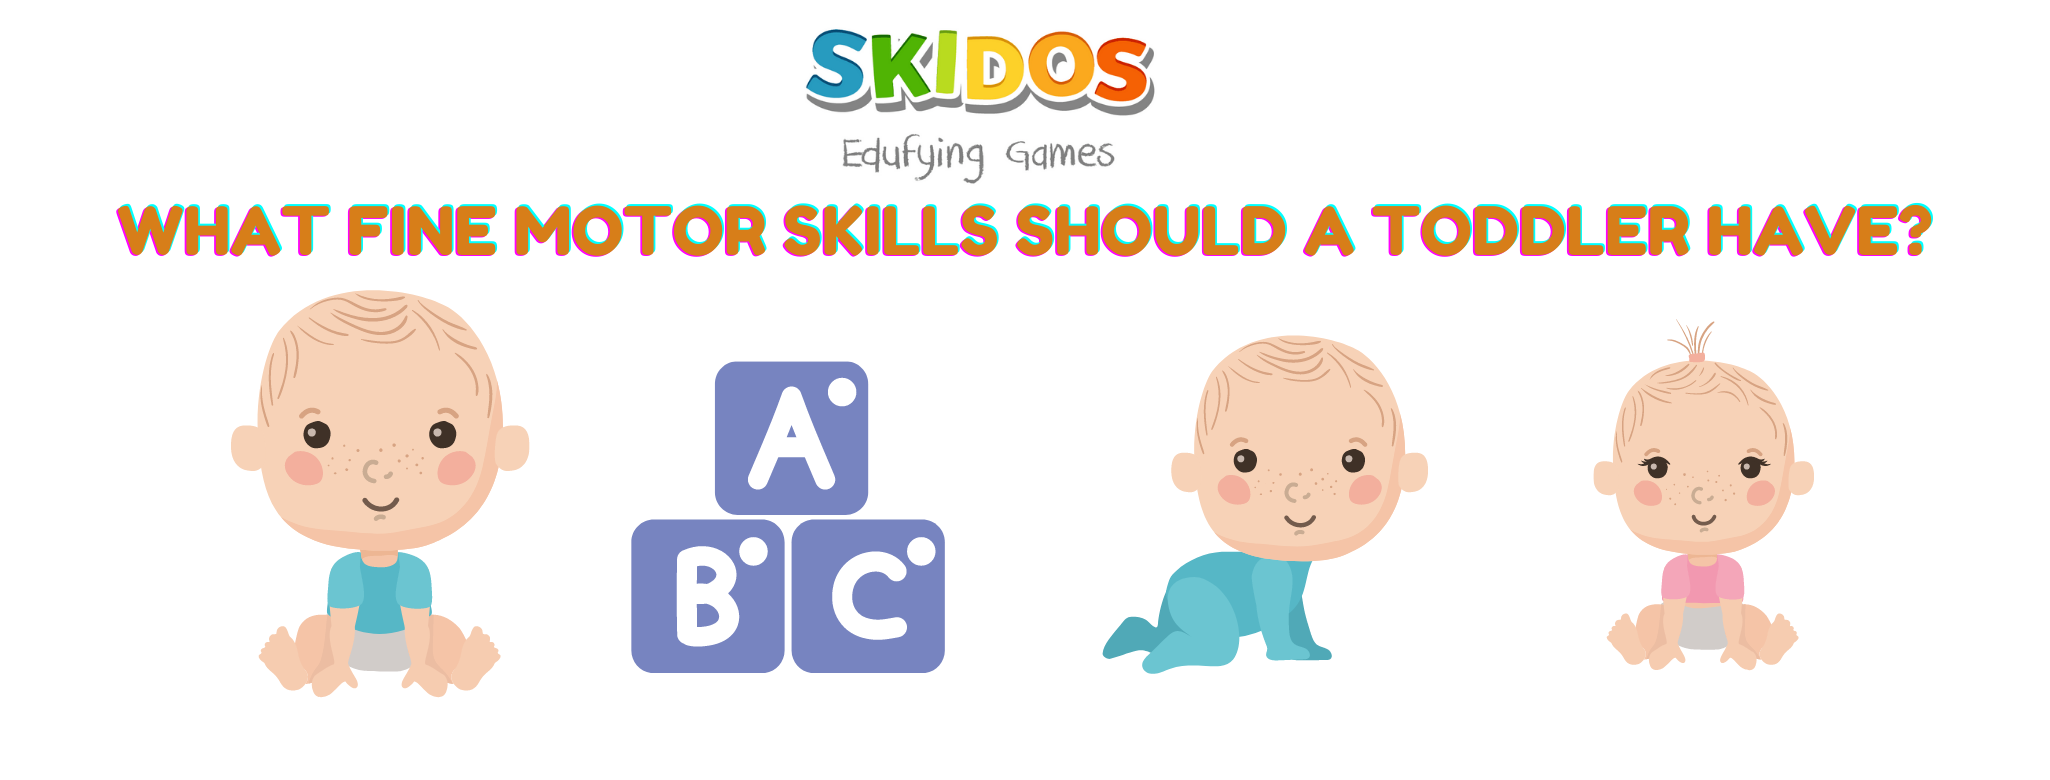 What fine motor skills should a toddler have